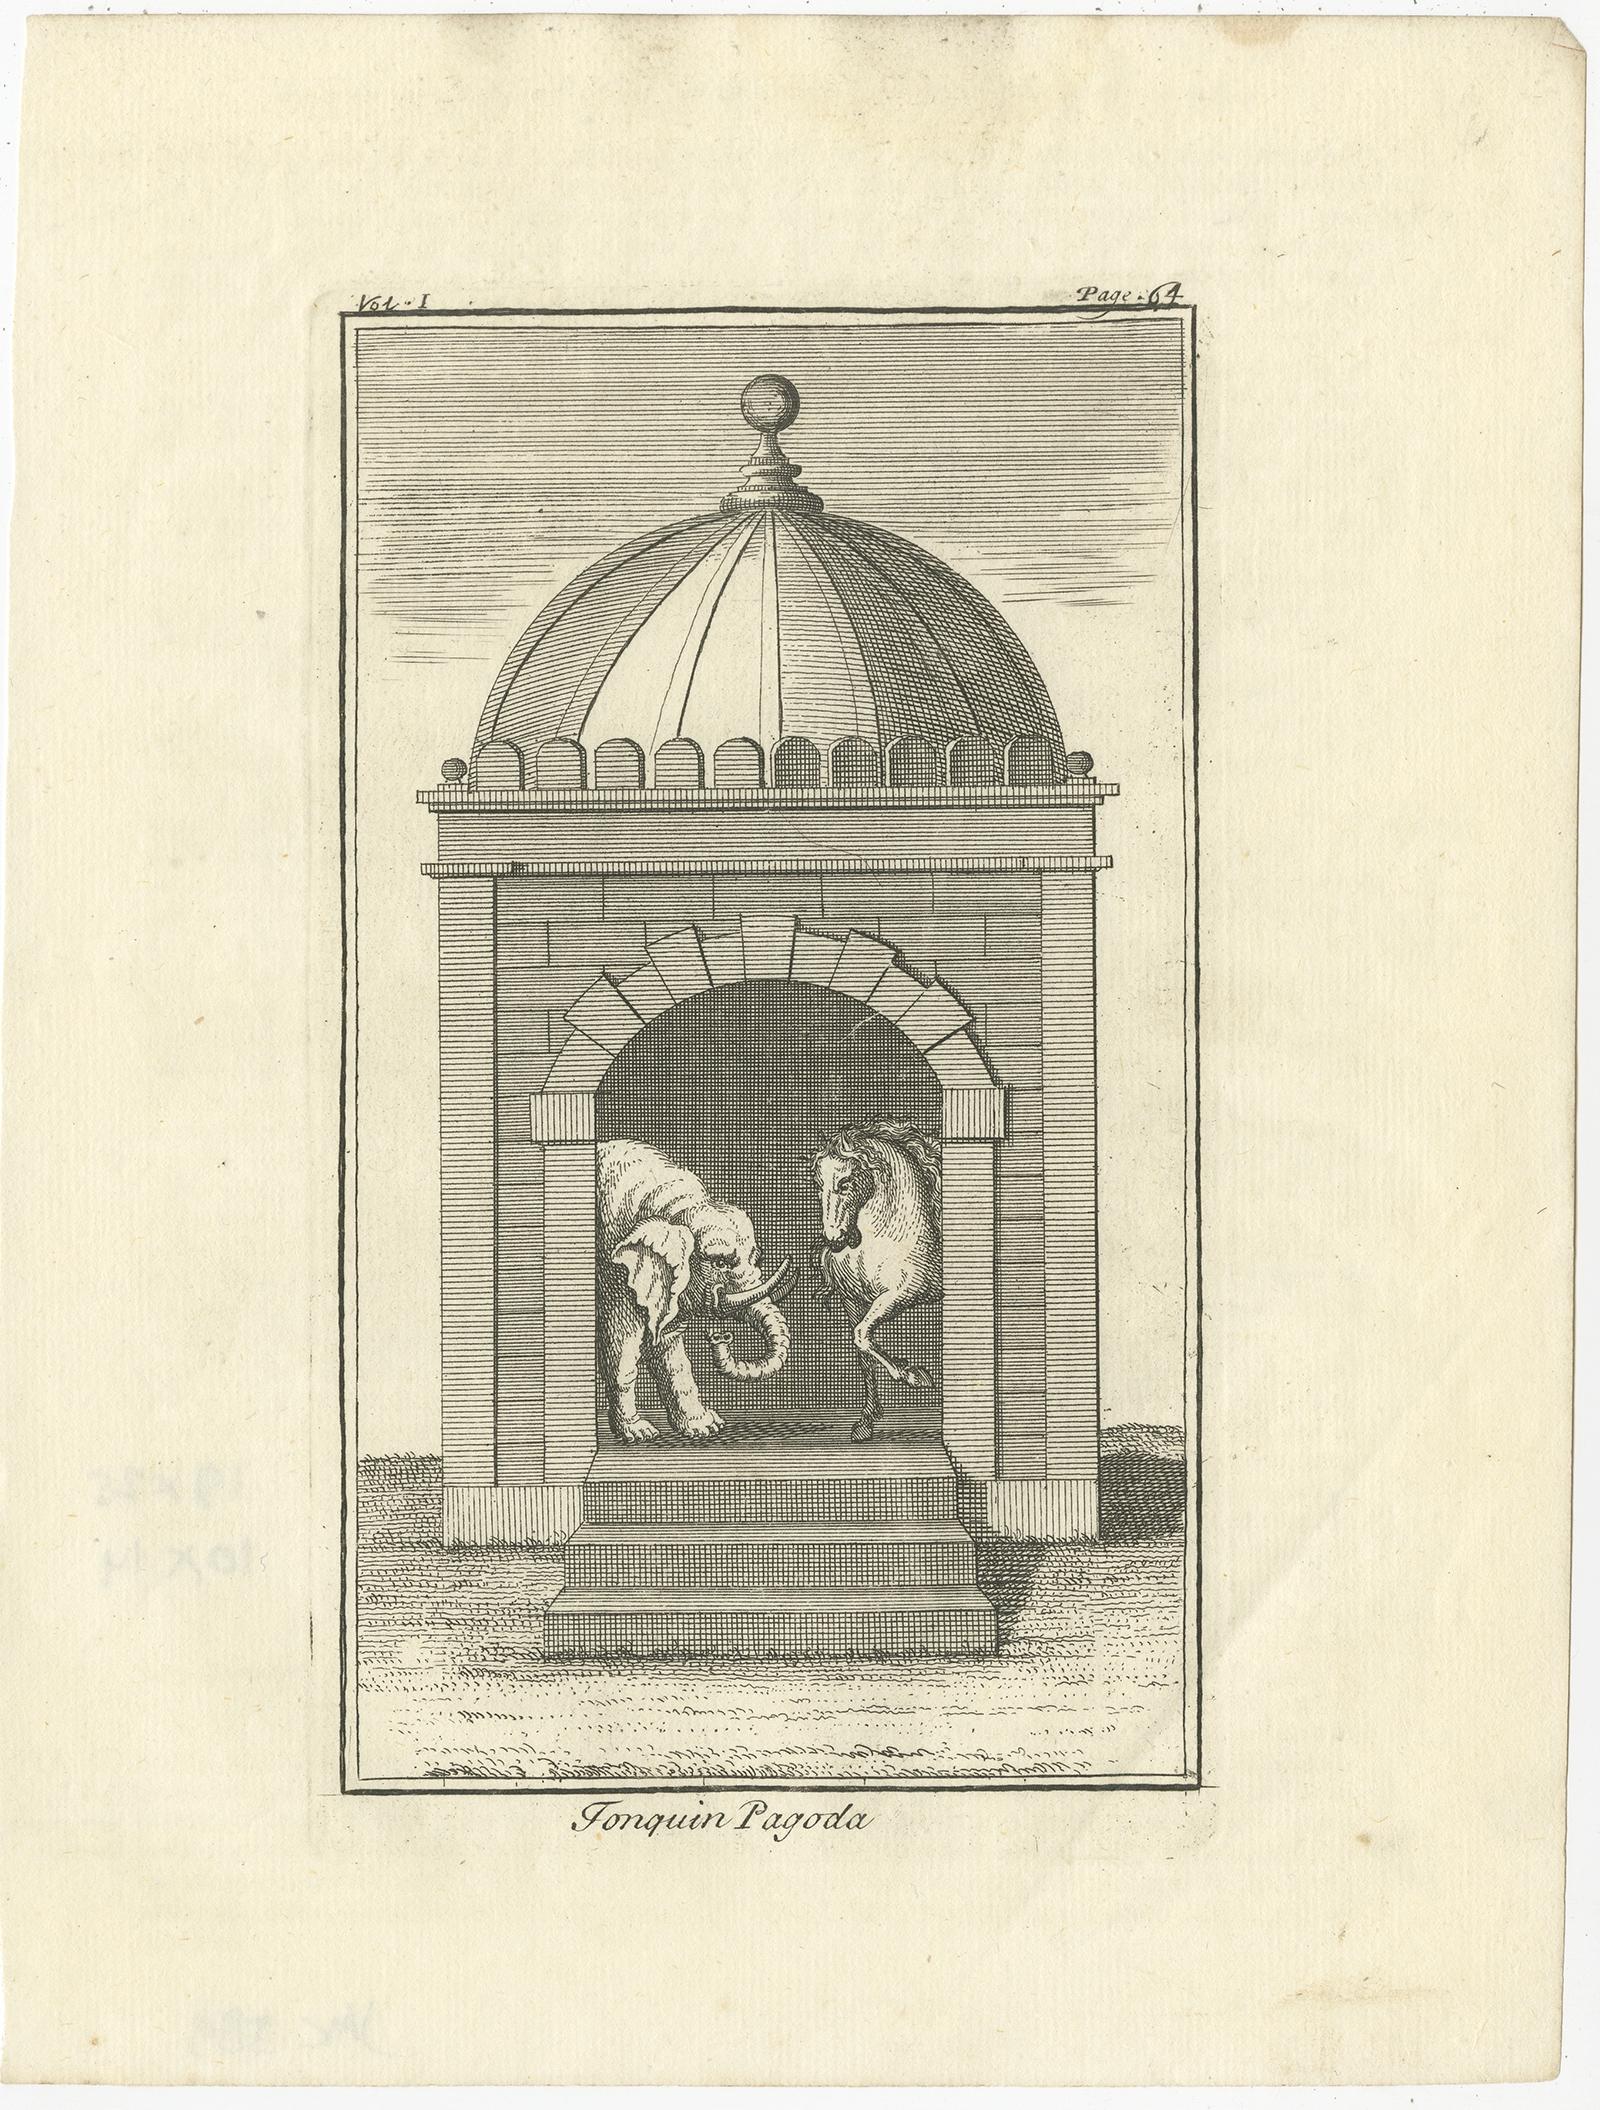 Description: Antique print titled 'Tonquin Pagoda'. 

View of a pagoda in Tonkin, Vietnam. 

This print originates from 'Modern History: Or, the Present State of All Nations (..)' by T. Salmon.

Artists and Engravers: Thomas Salmon (1679–1767)